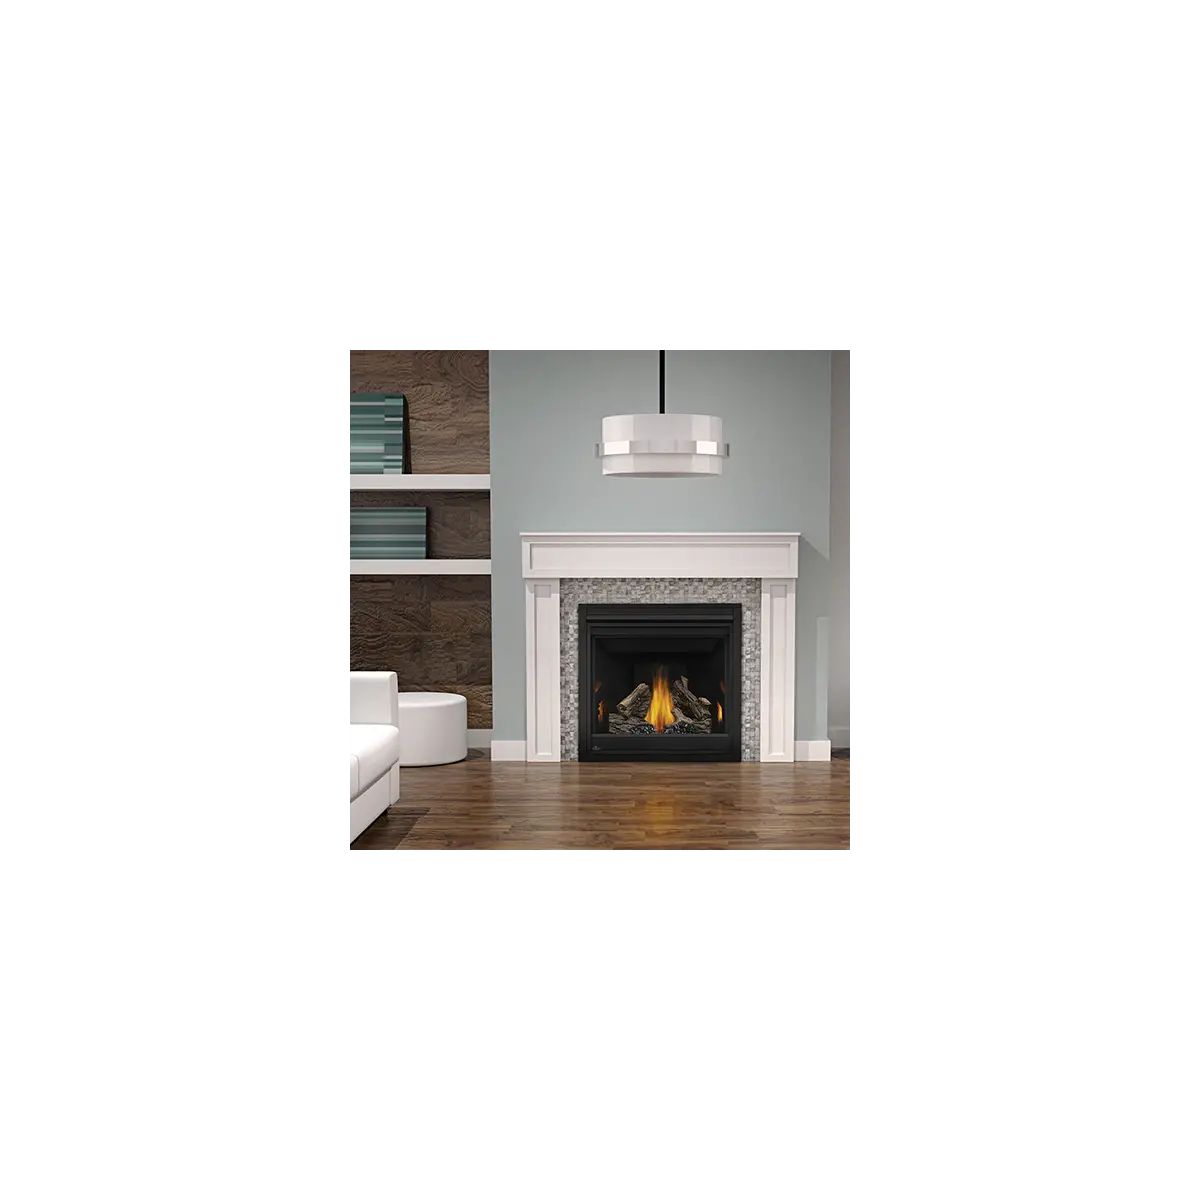 18000 BTU Built-In Direct Vent Natural Gas Fireplace with Safety Barrier and Electronic Ignition ... | Build.com, Inc.